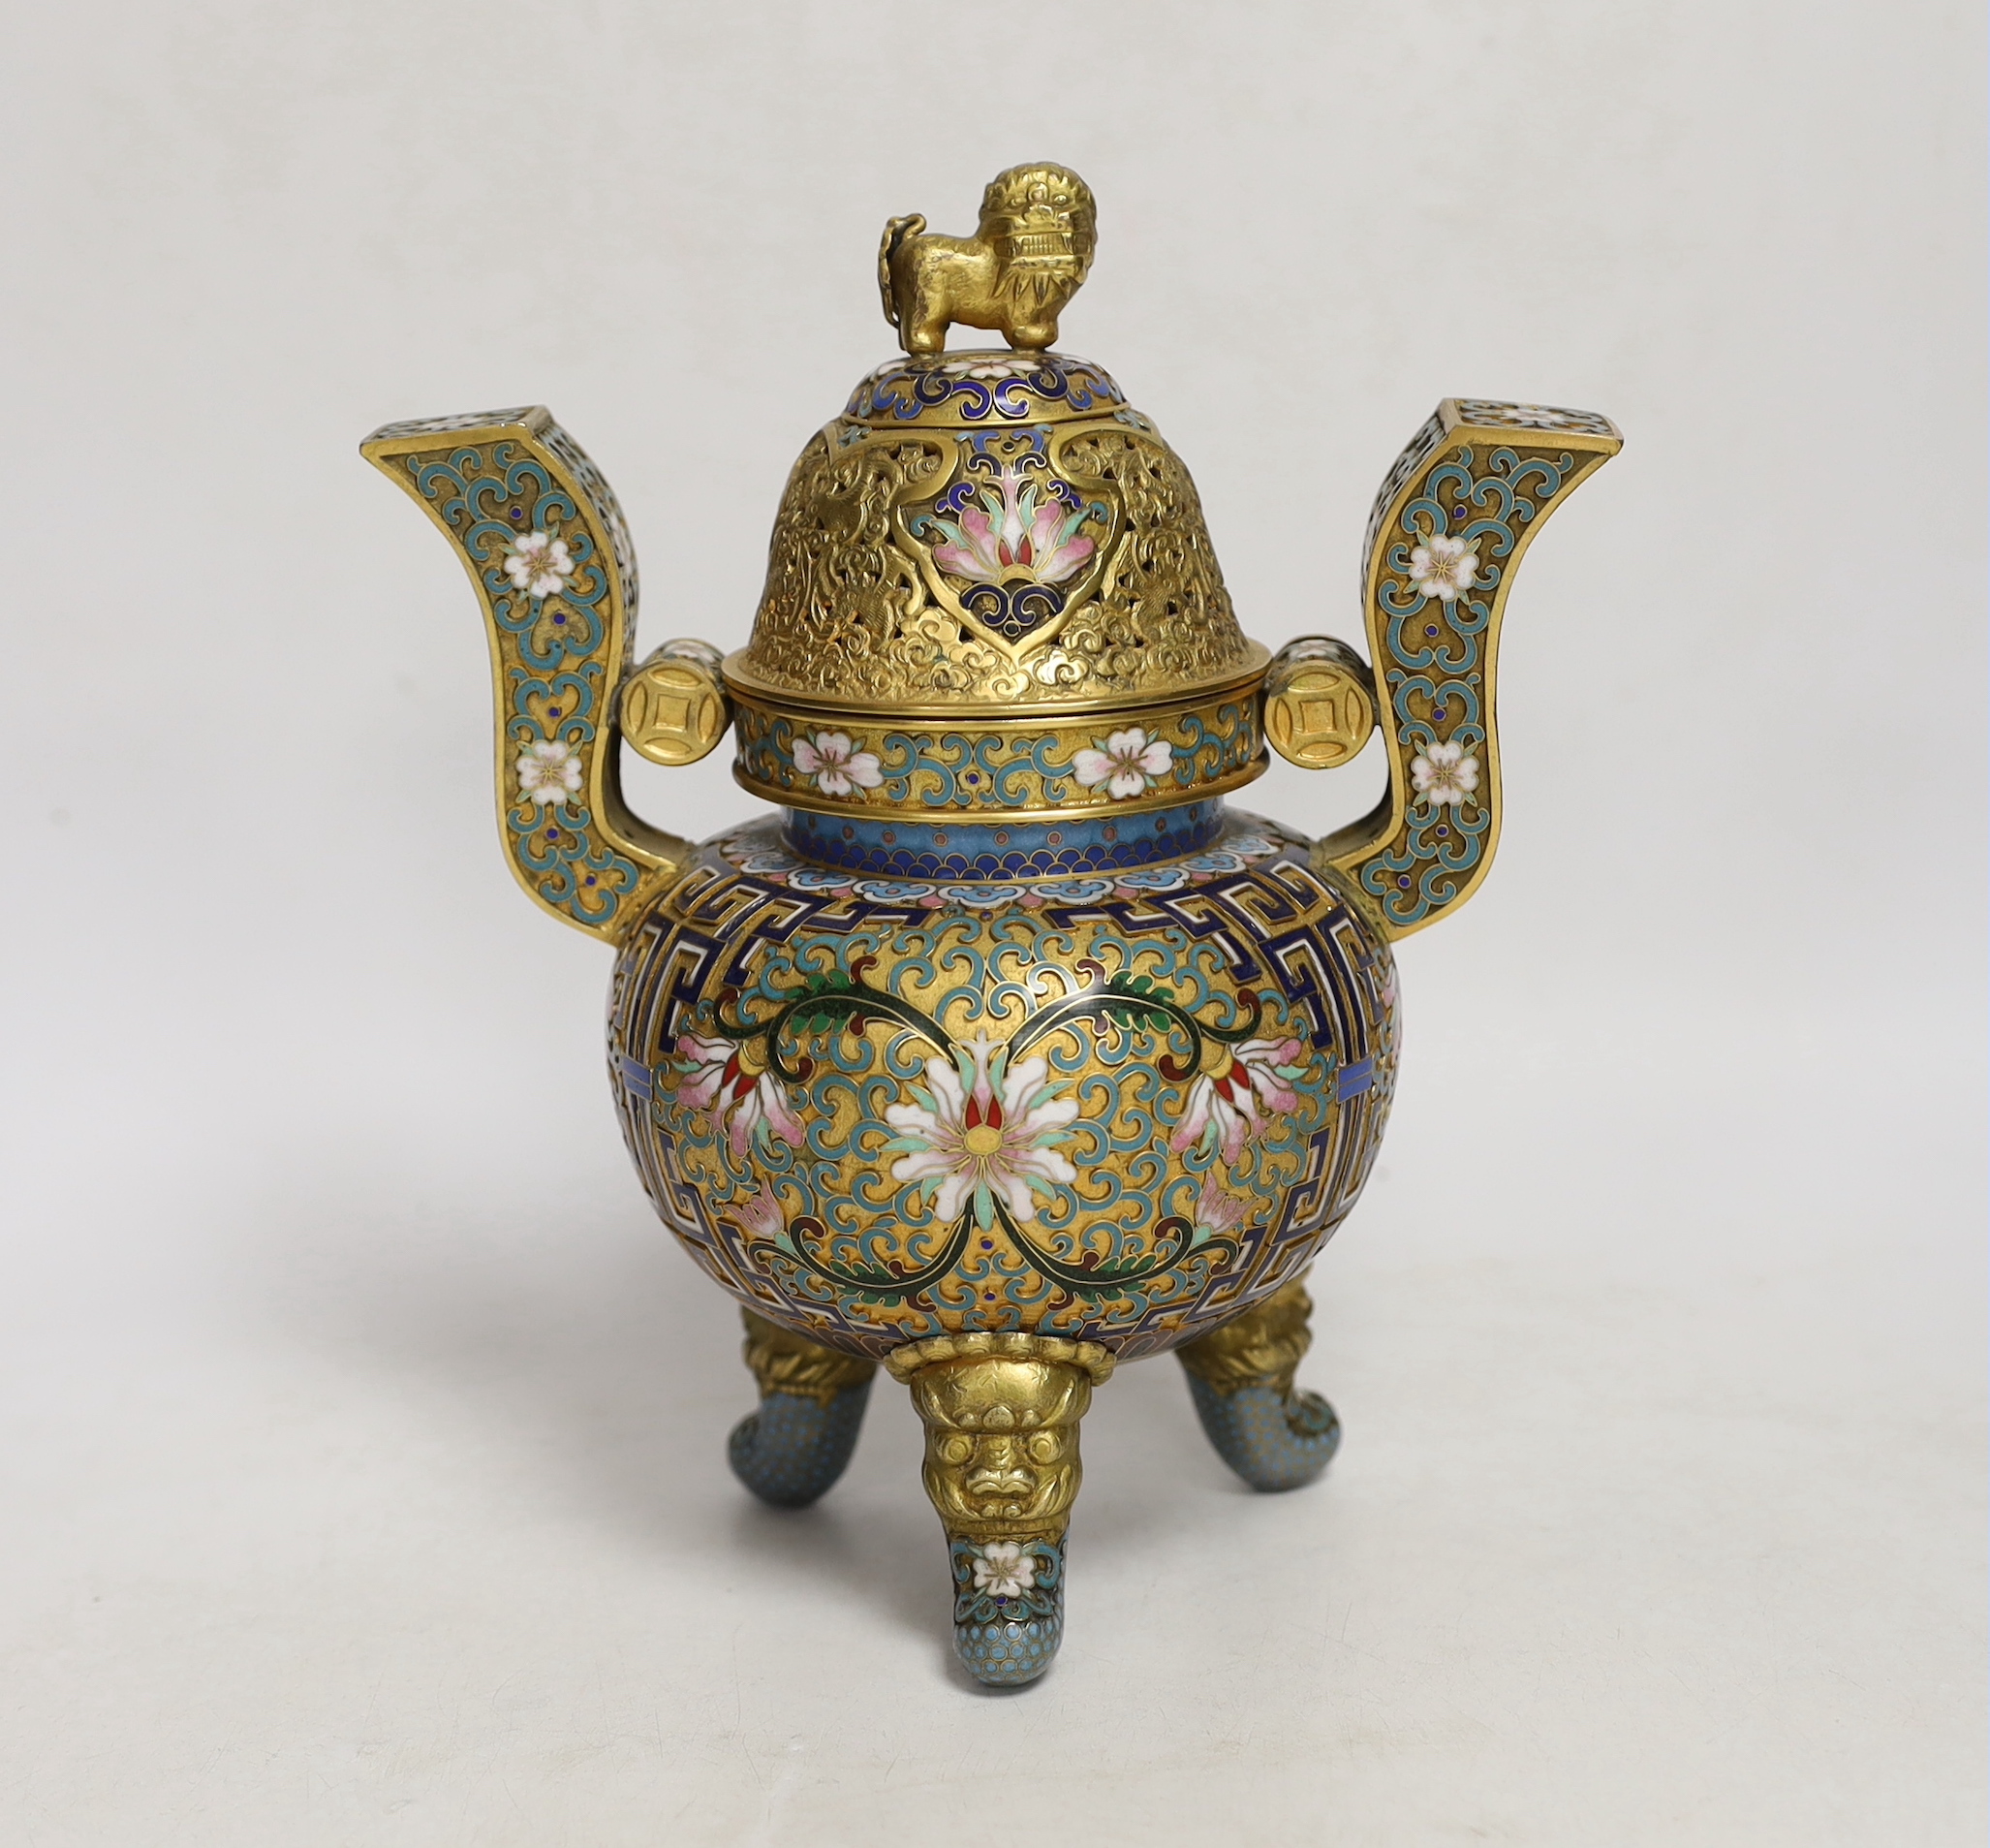 A Chinese cloisonné enamel tripod censer and cover, 22cm high including cover                                                                                                                                               